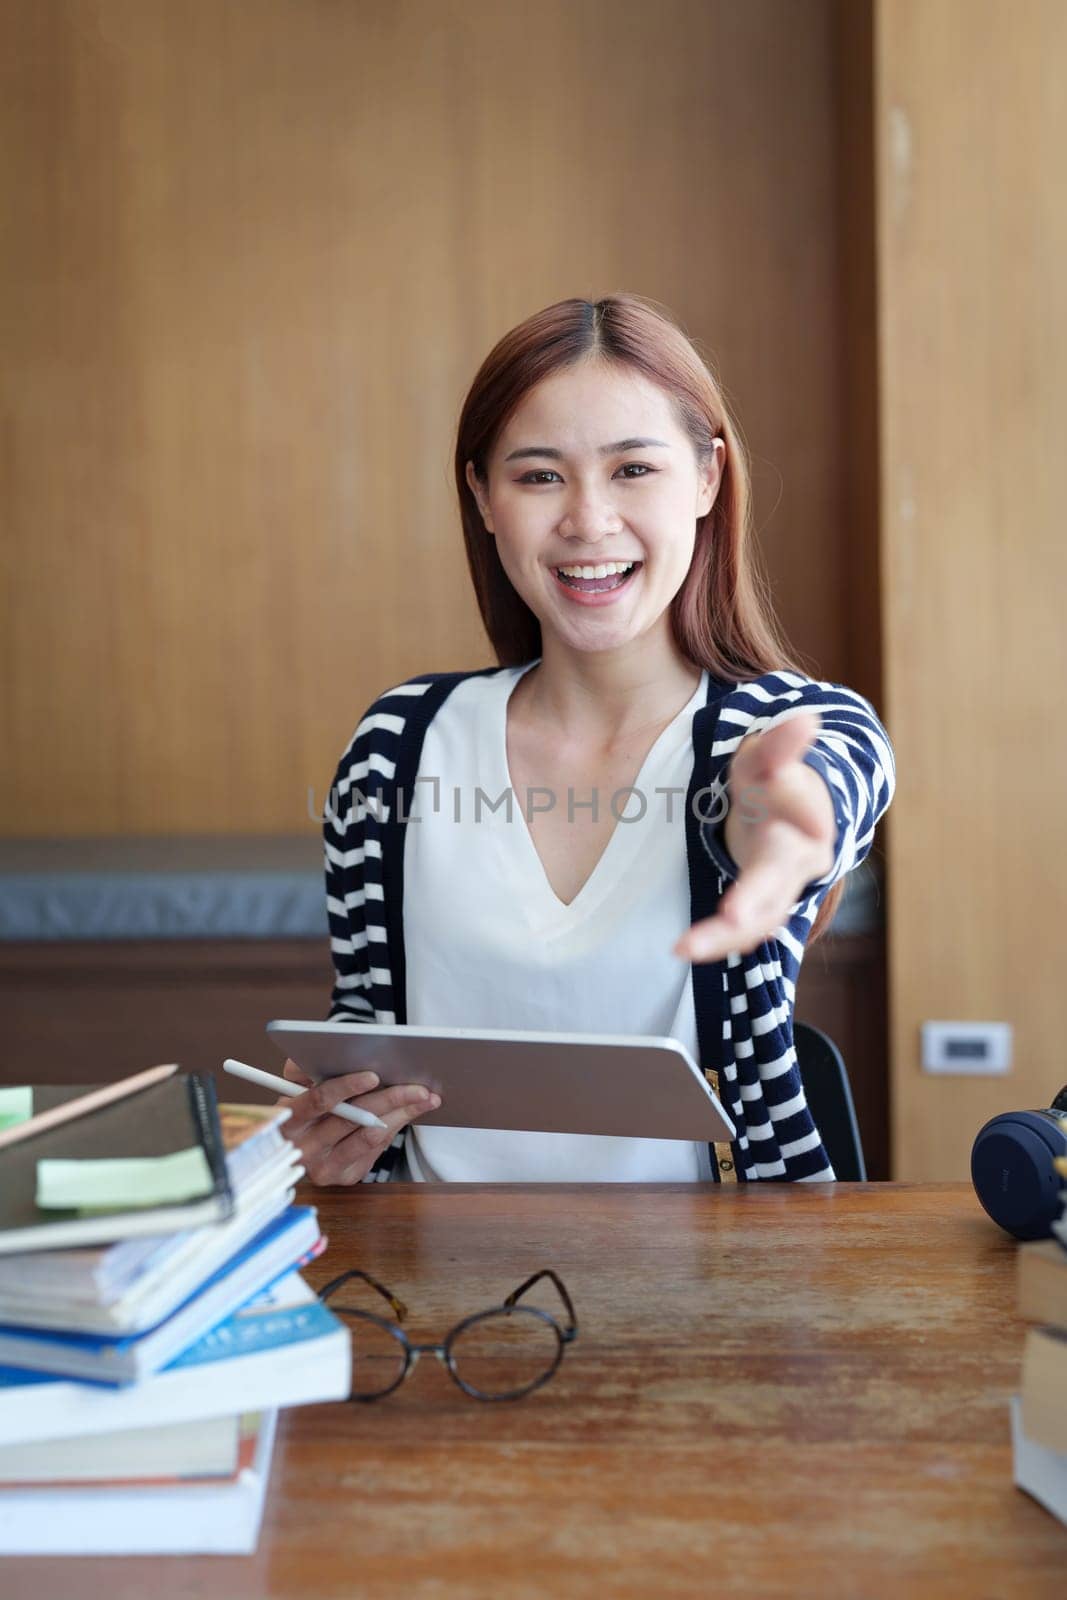 A portrait of a young Asian woman showing a smiling face and gesturing out ideas while using a tablet computer studying online at a library by Manastrong